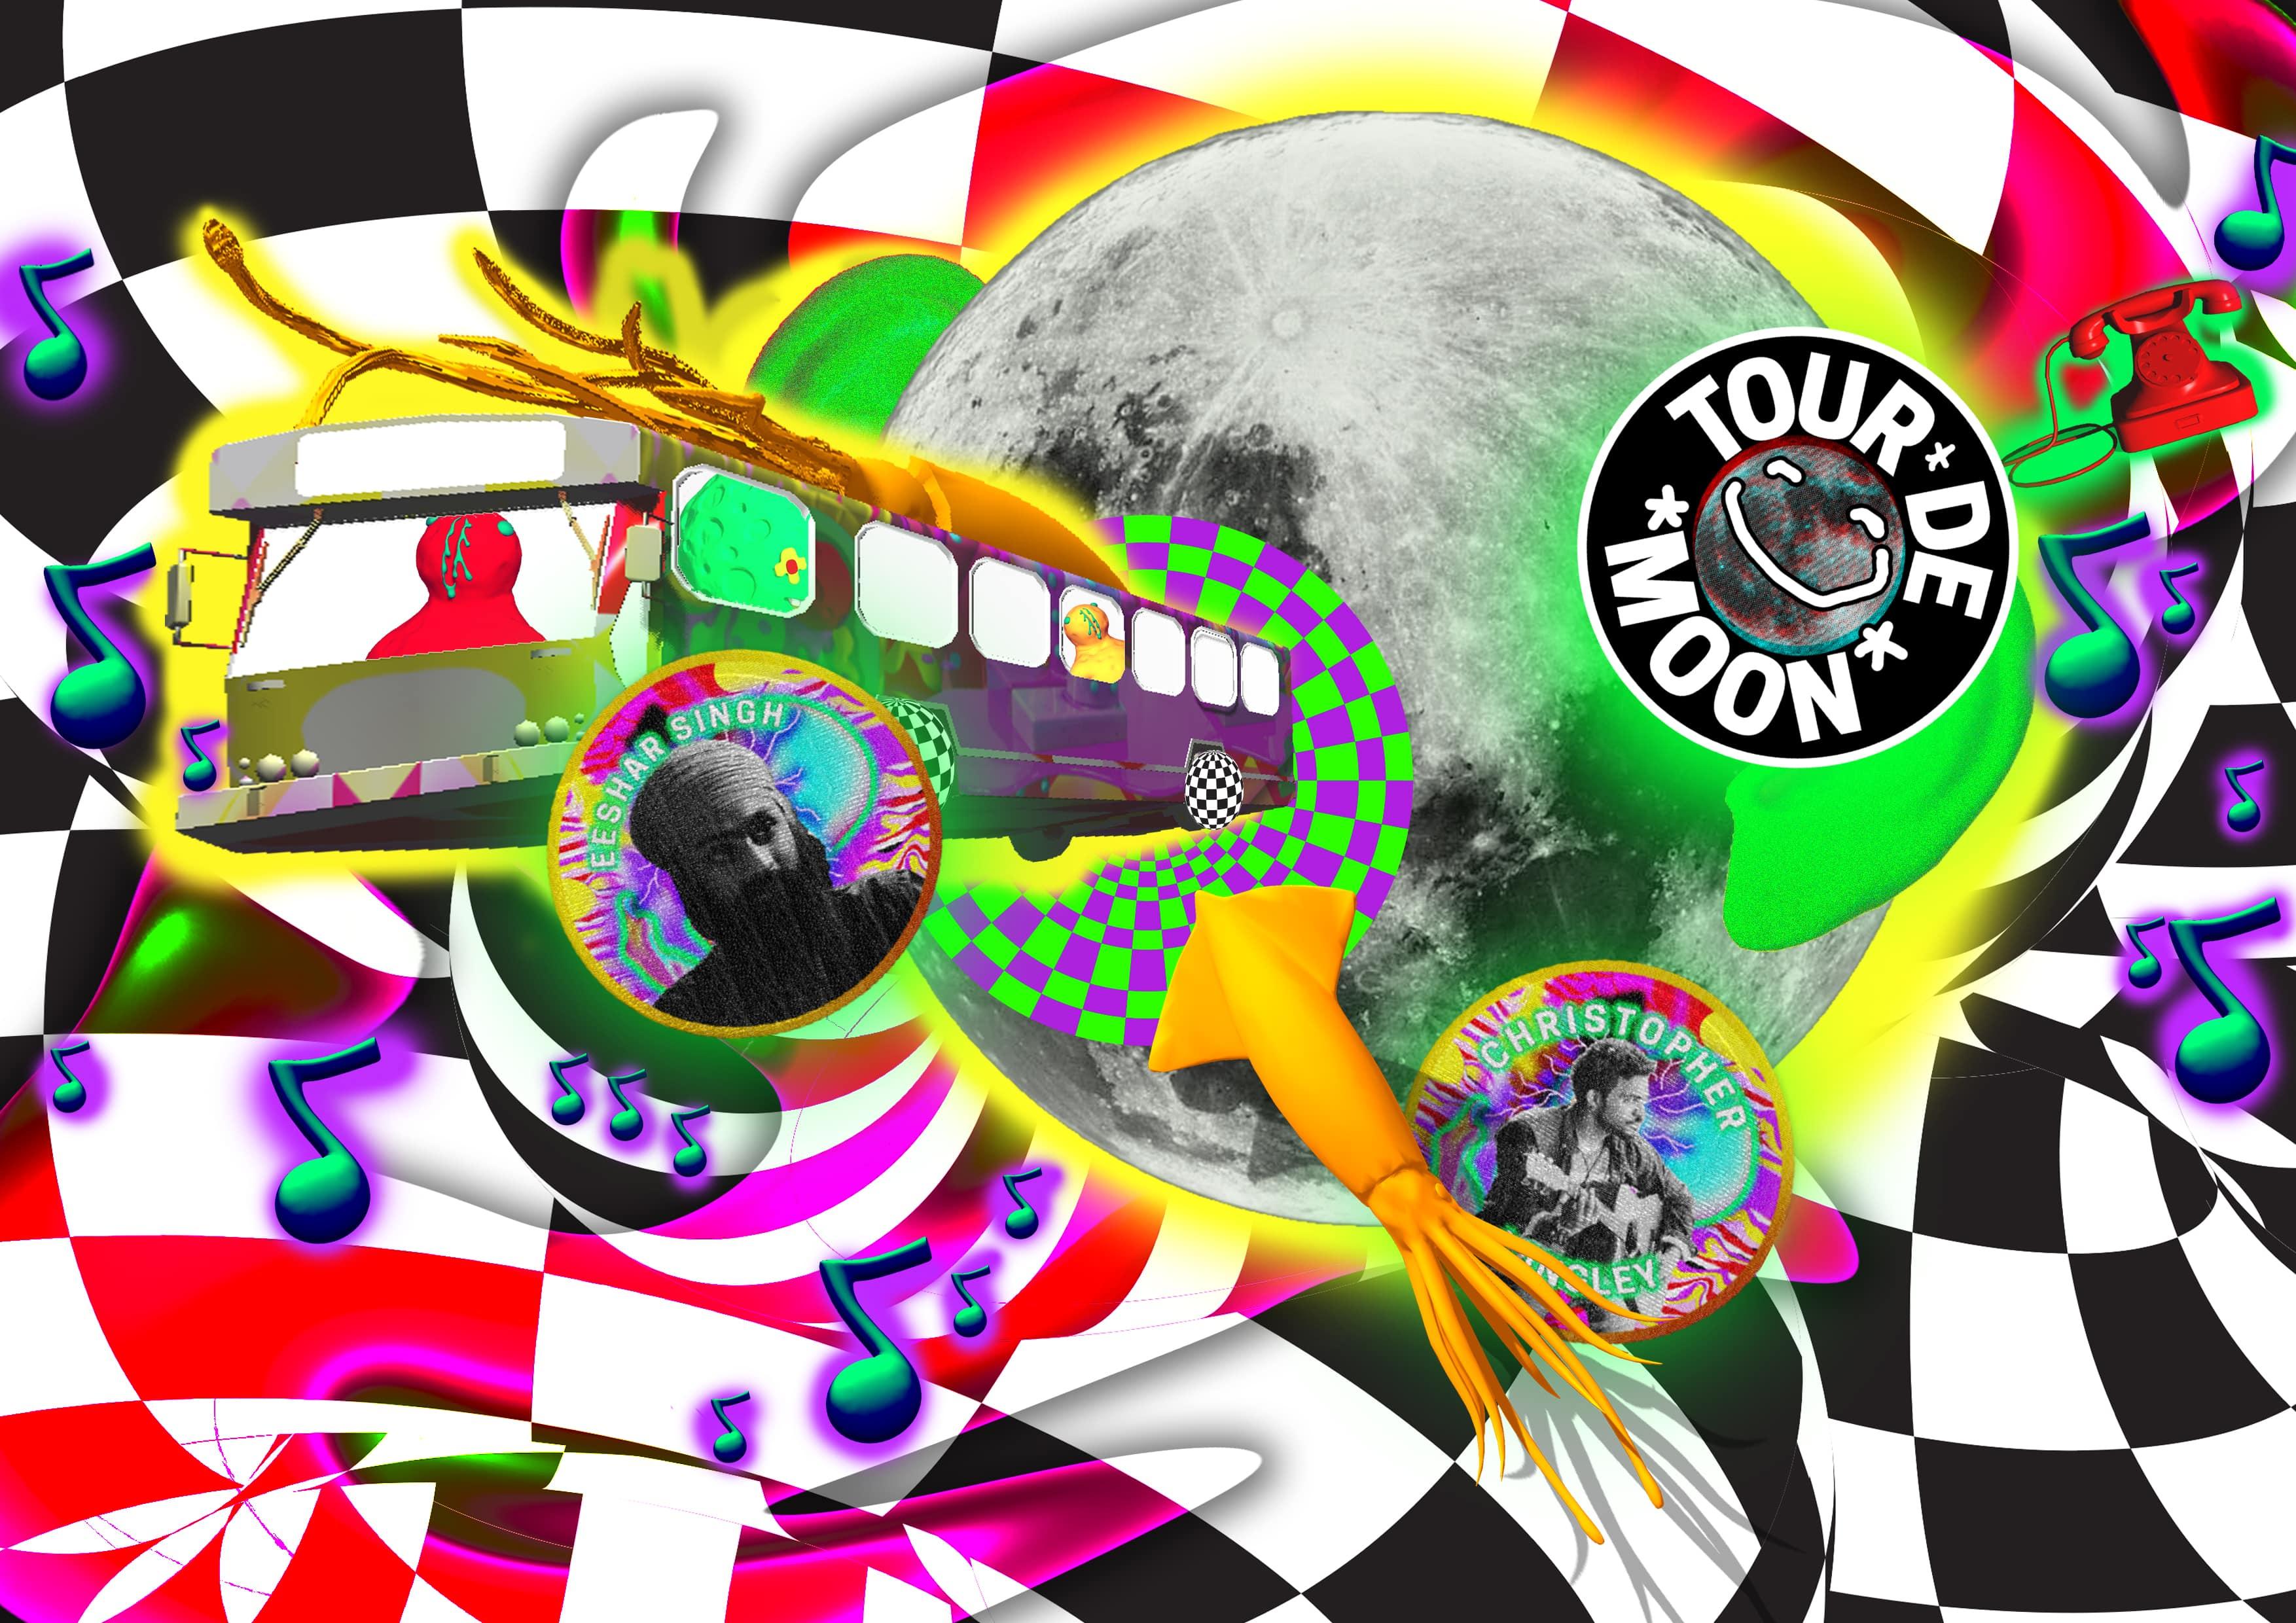 Moon arkestra bus image and chessboard